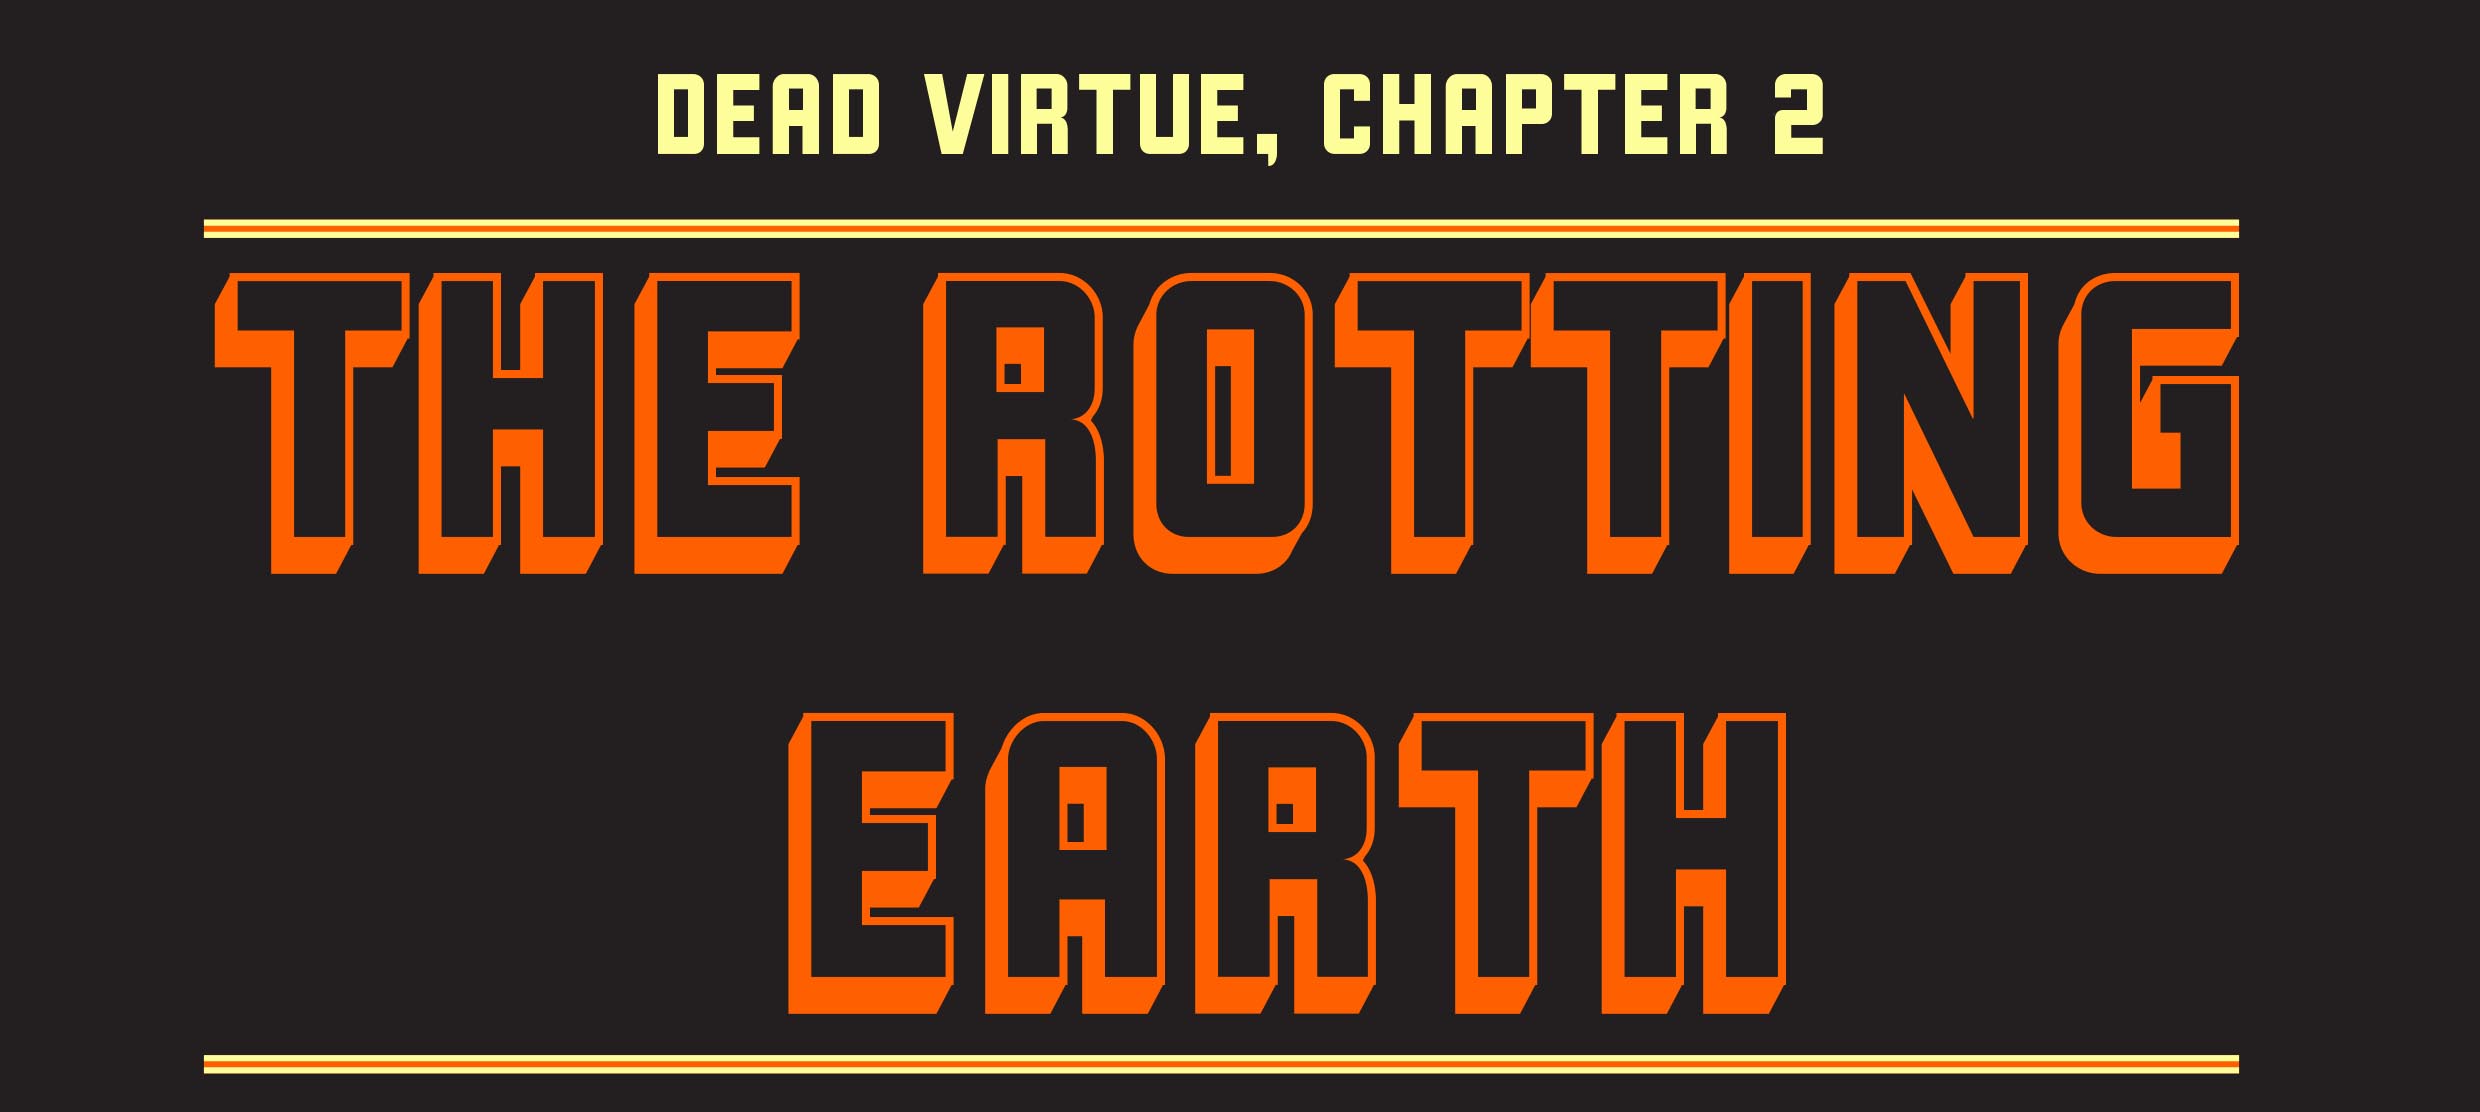 The Rotting Earth: Dead Virtue Chapter 2